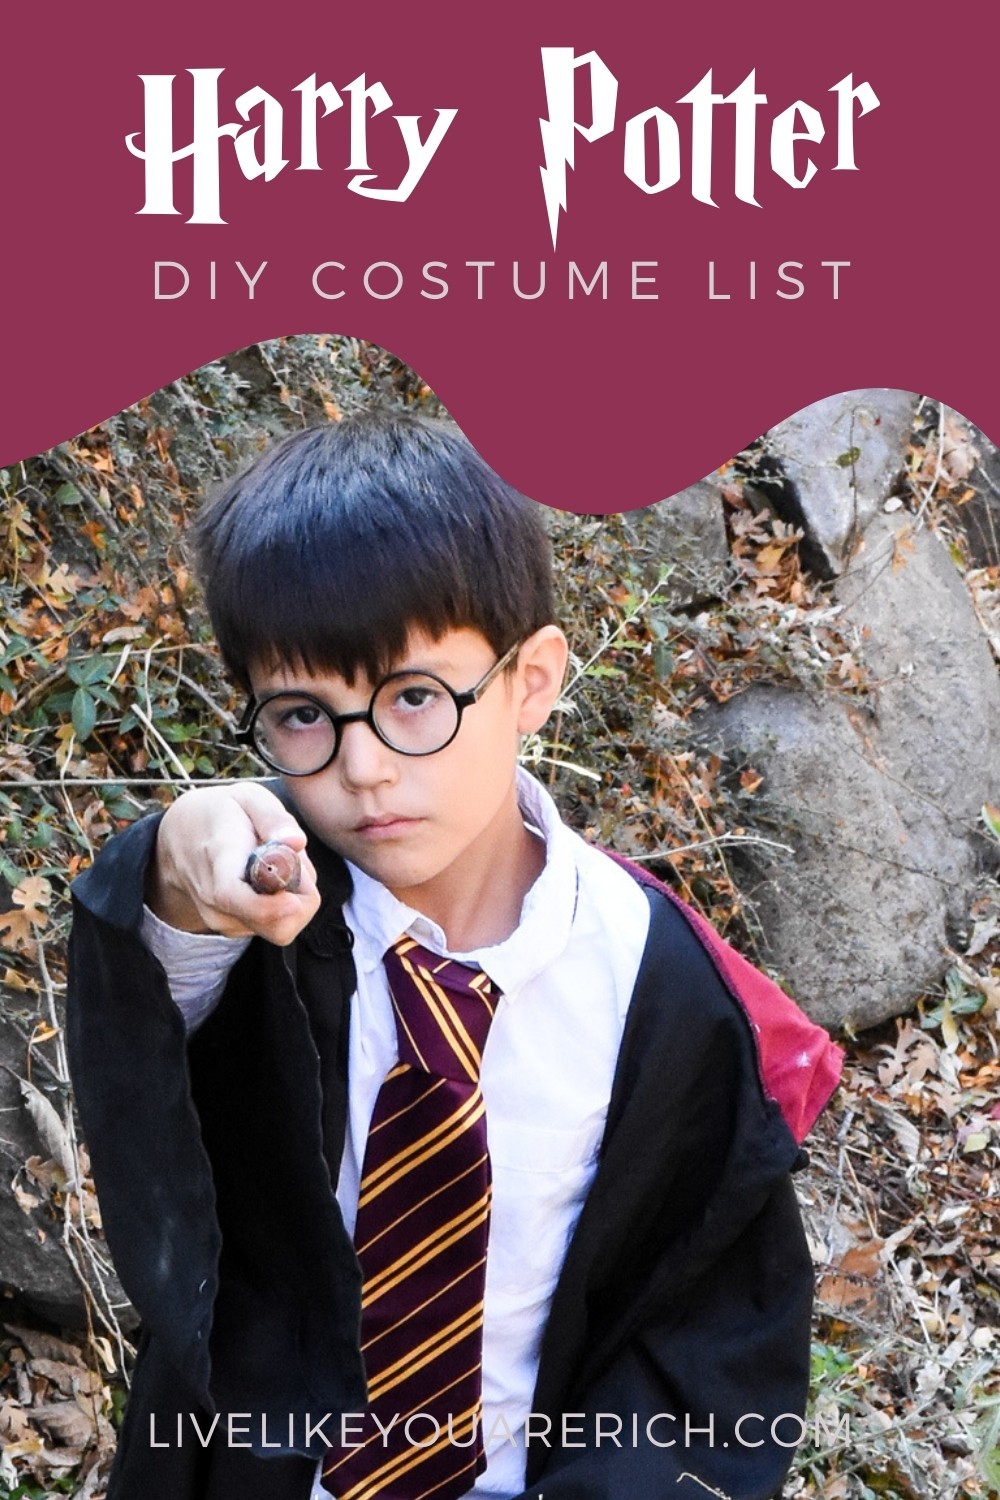 If you are looking to put together a Harry Potter costume, this list will help you make sure you have all of the necessary items. Putting together my son’s costume was very simple and cost us less than $10.00. I hope this Harry Potter Costume list has helped you plan out what you need for the costume. #harrypotter #halloweencostume